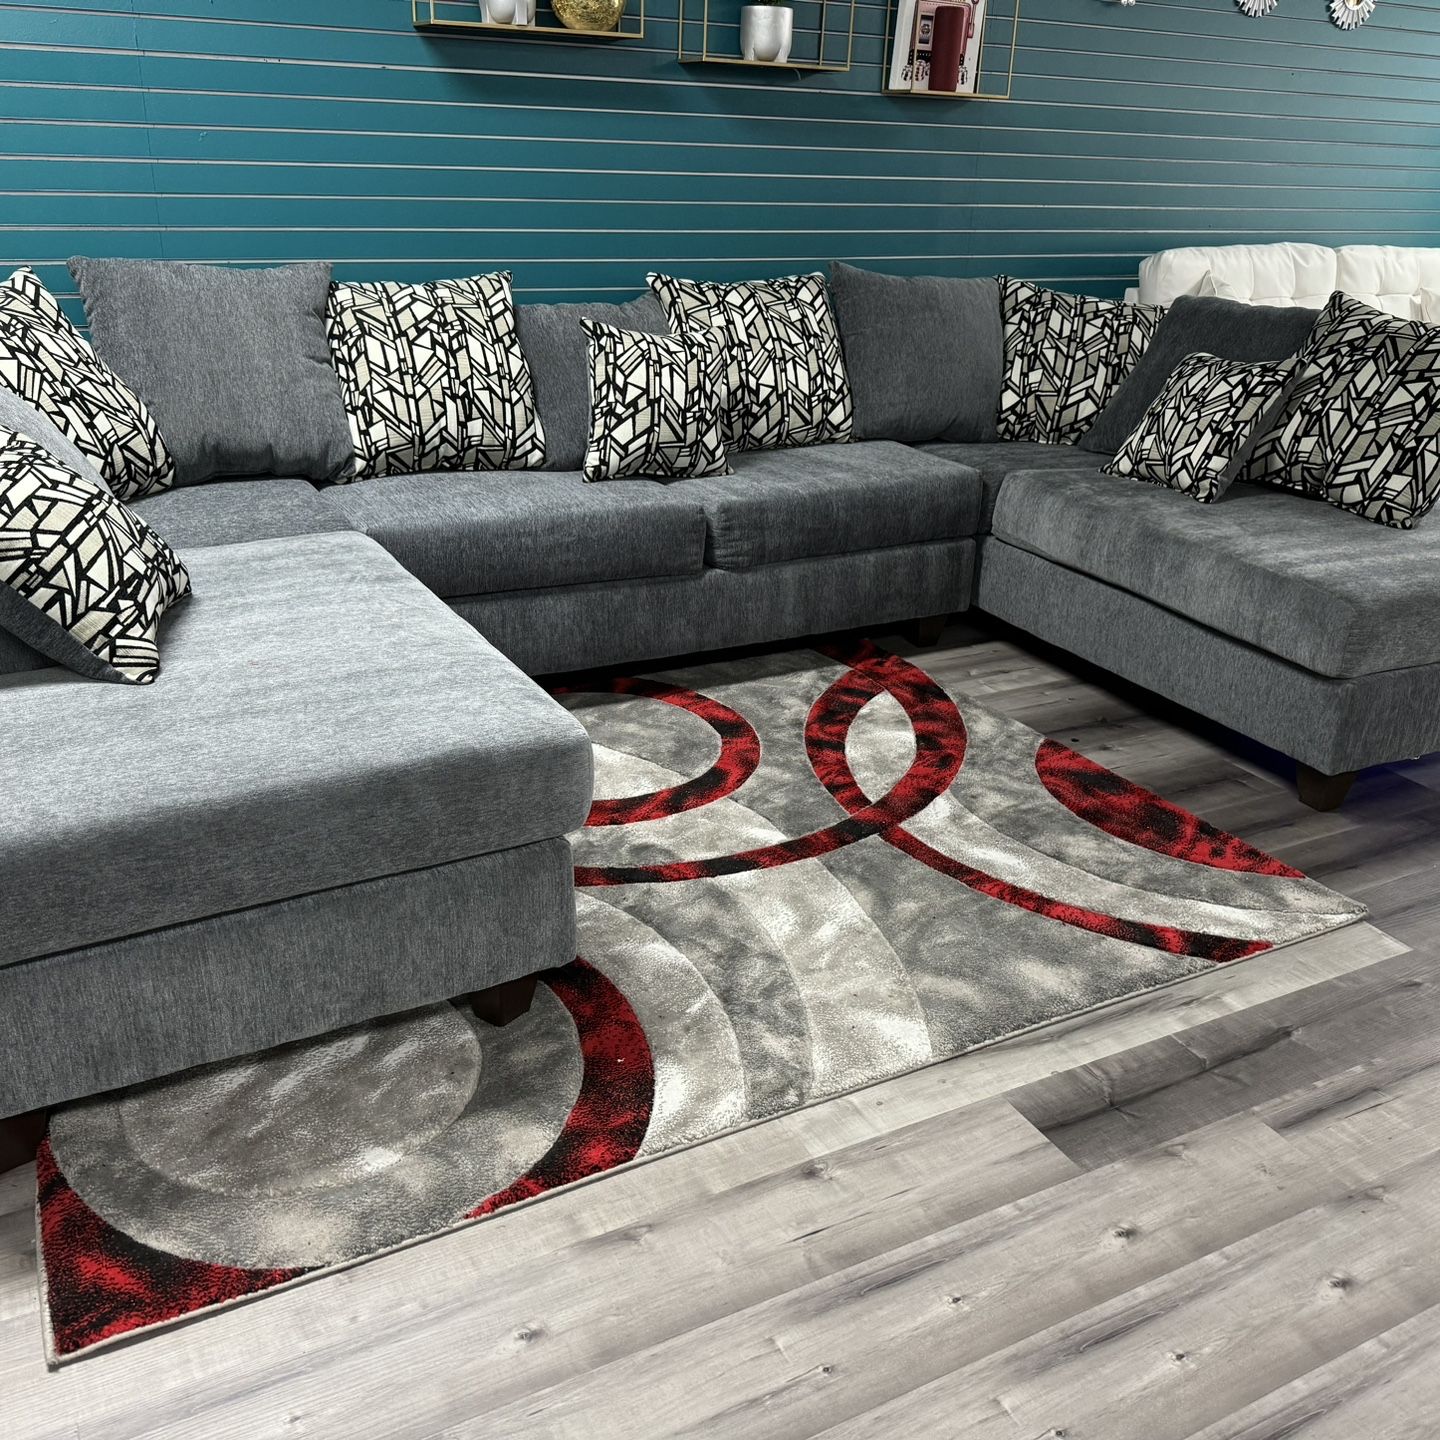 GREY OVERSIZE SECTIONAL /$49 & Take It Home 